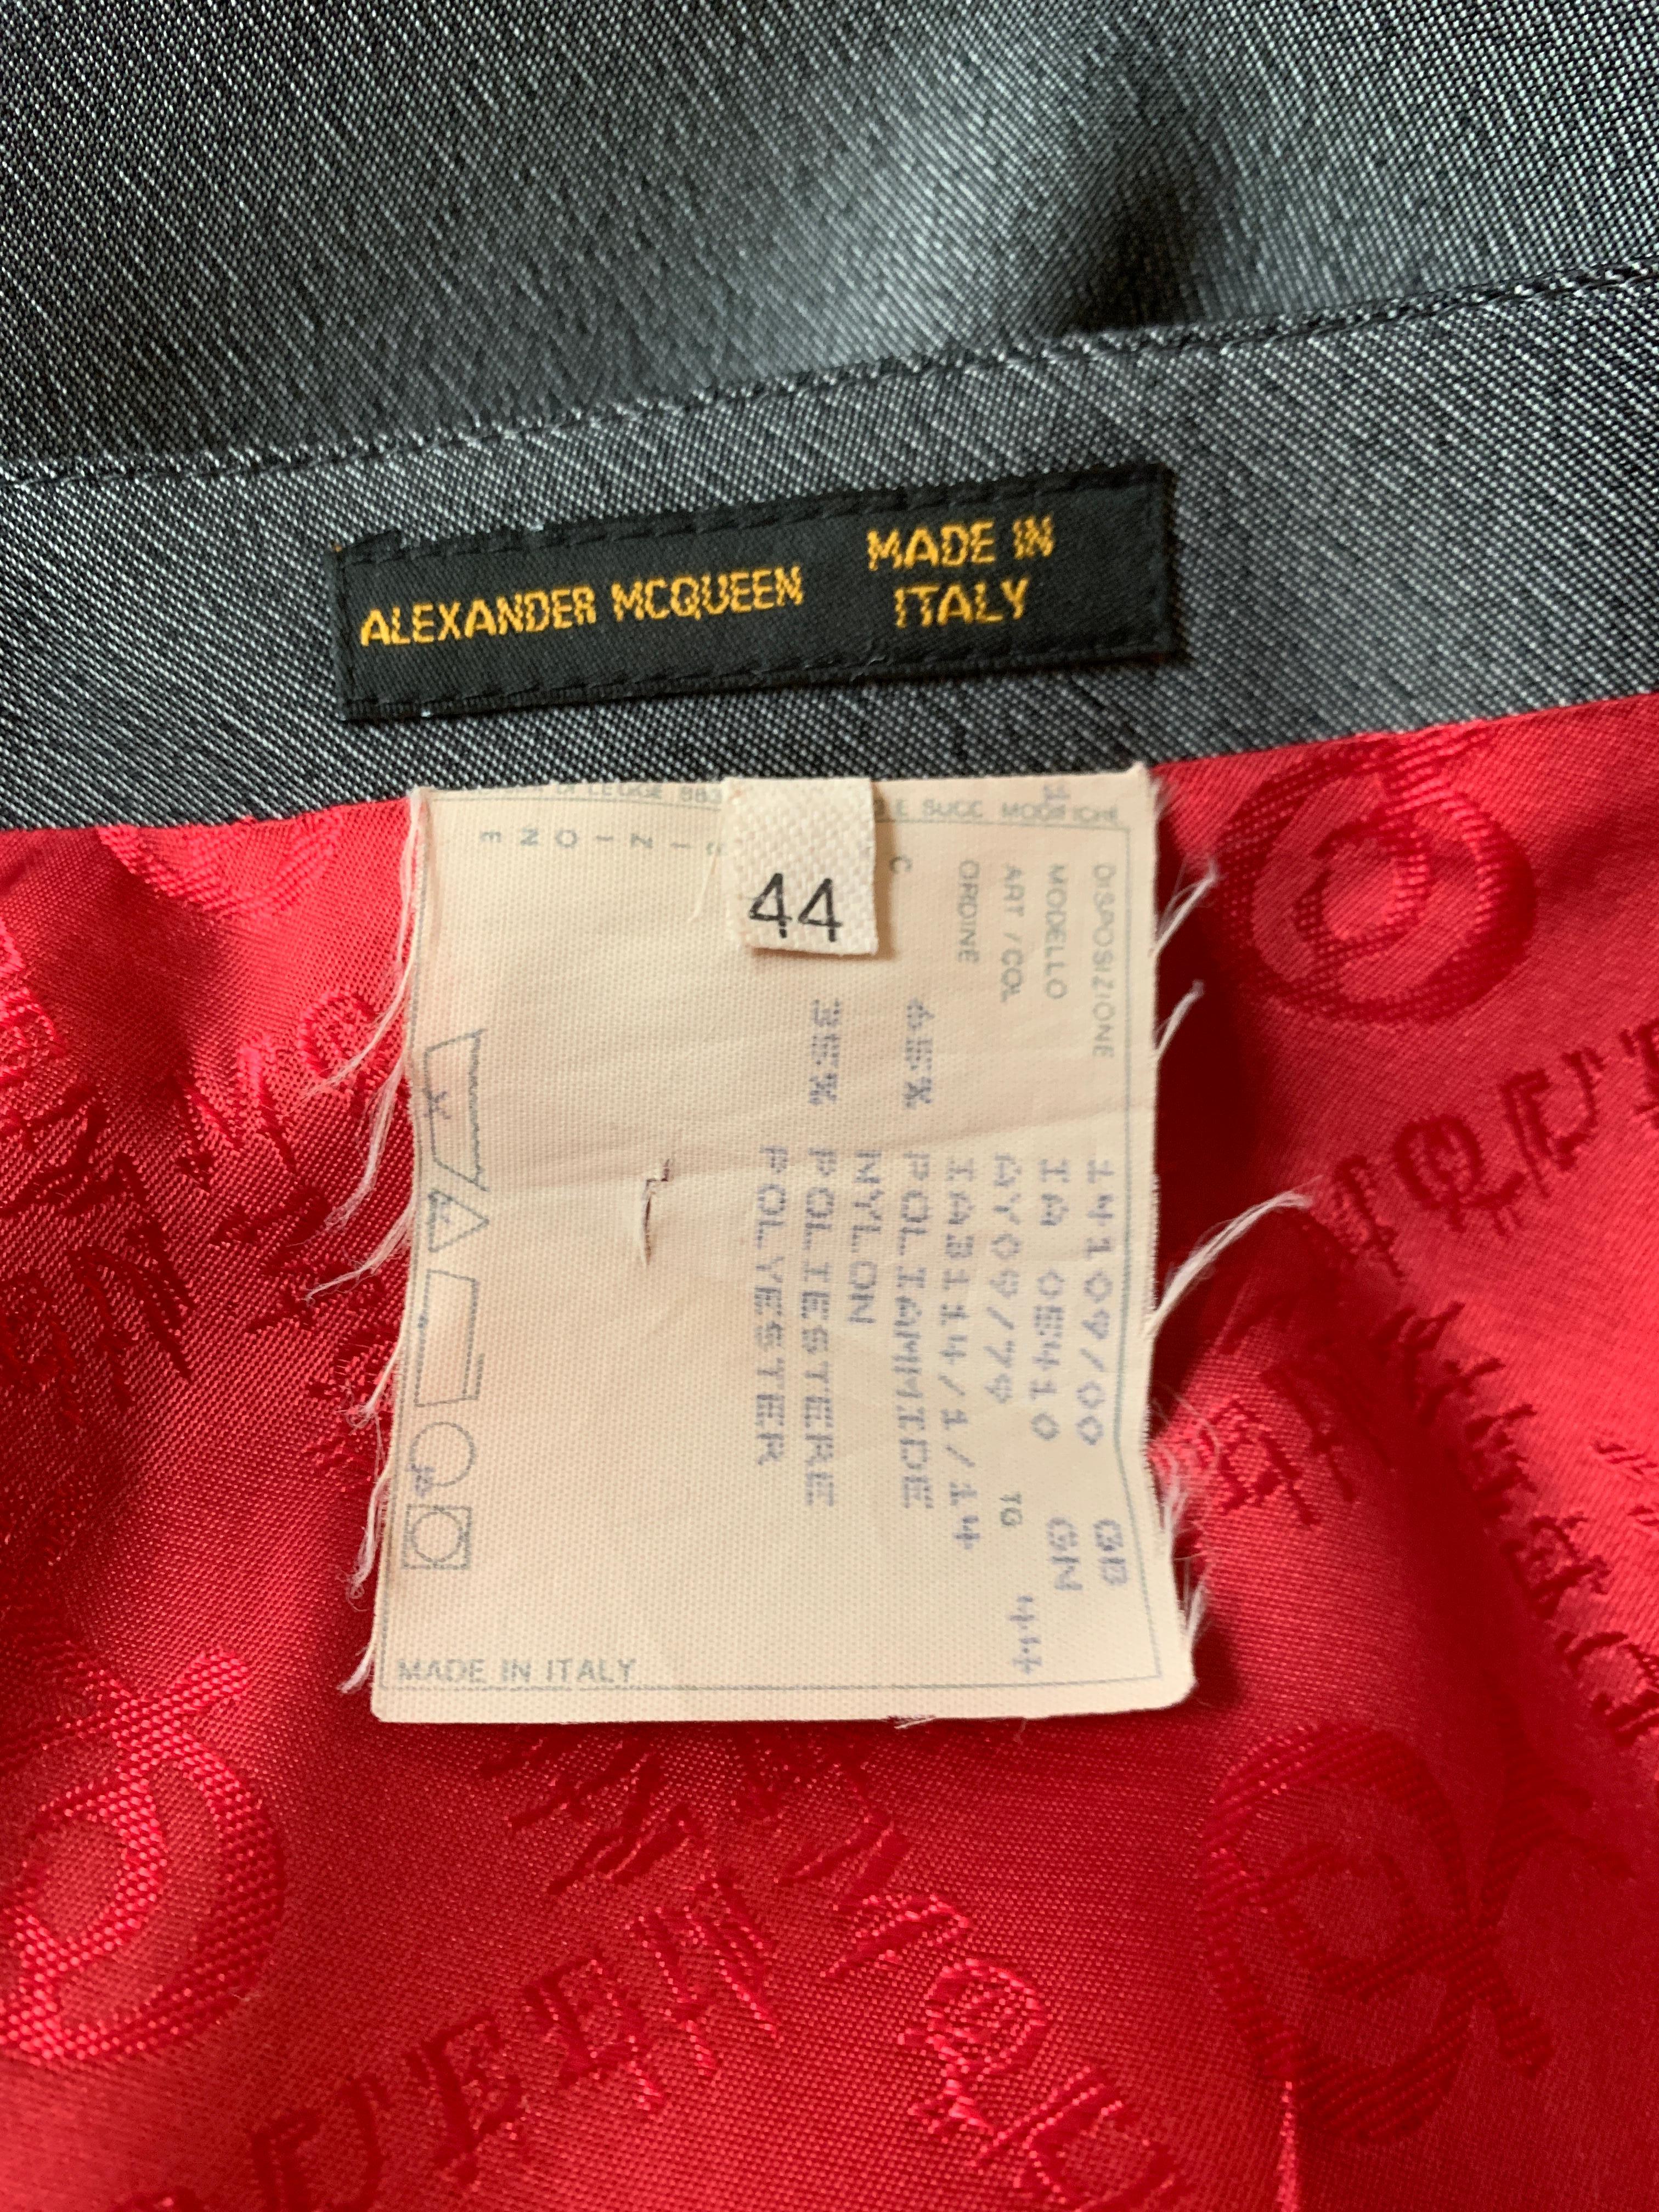 Alexander Mcqueen 1998 Joan Skirt Suit with Zippered Jacket and Logo Red Lining For Sale 1